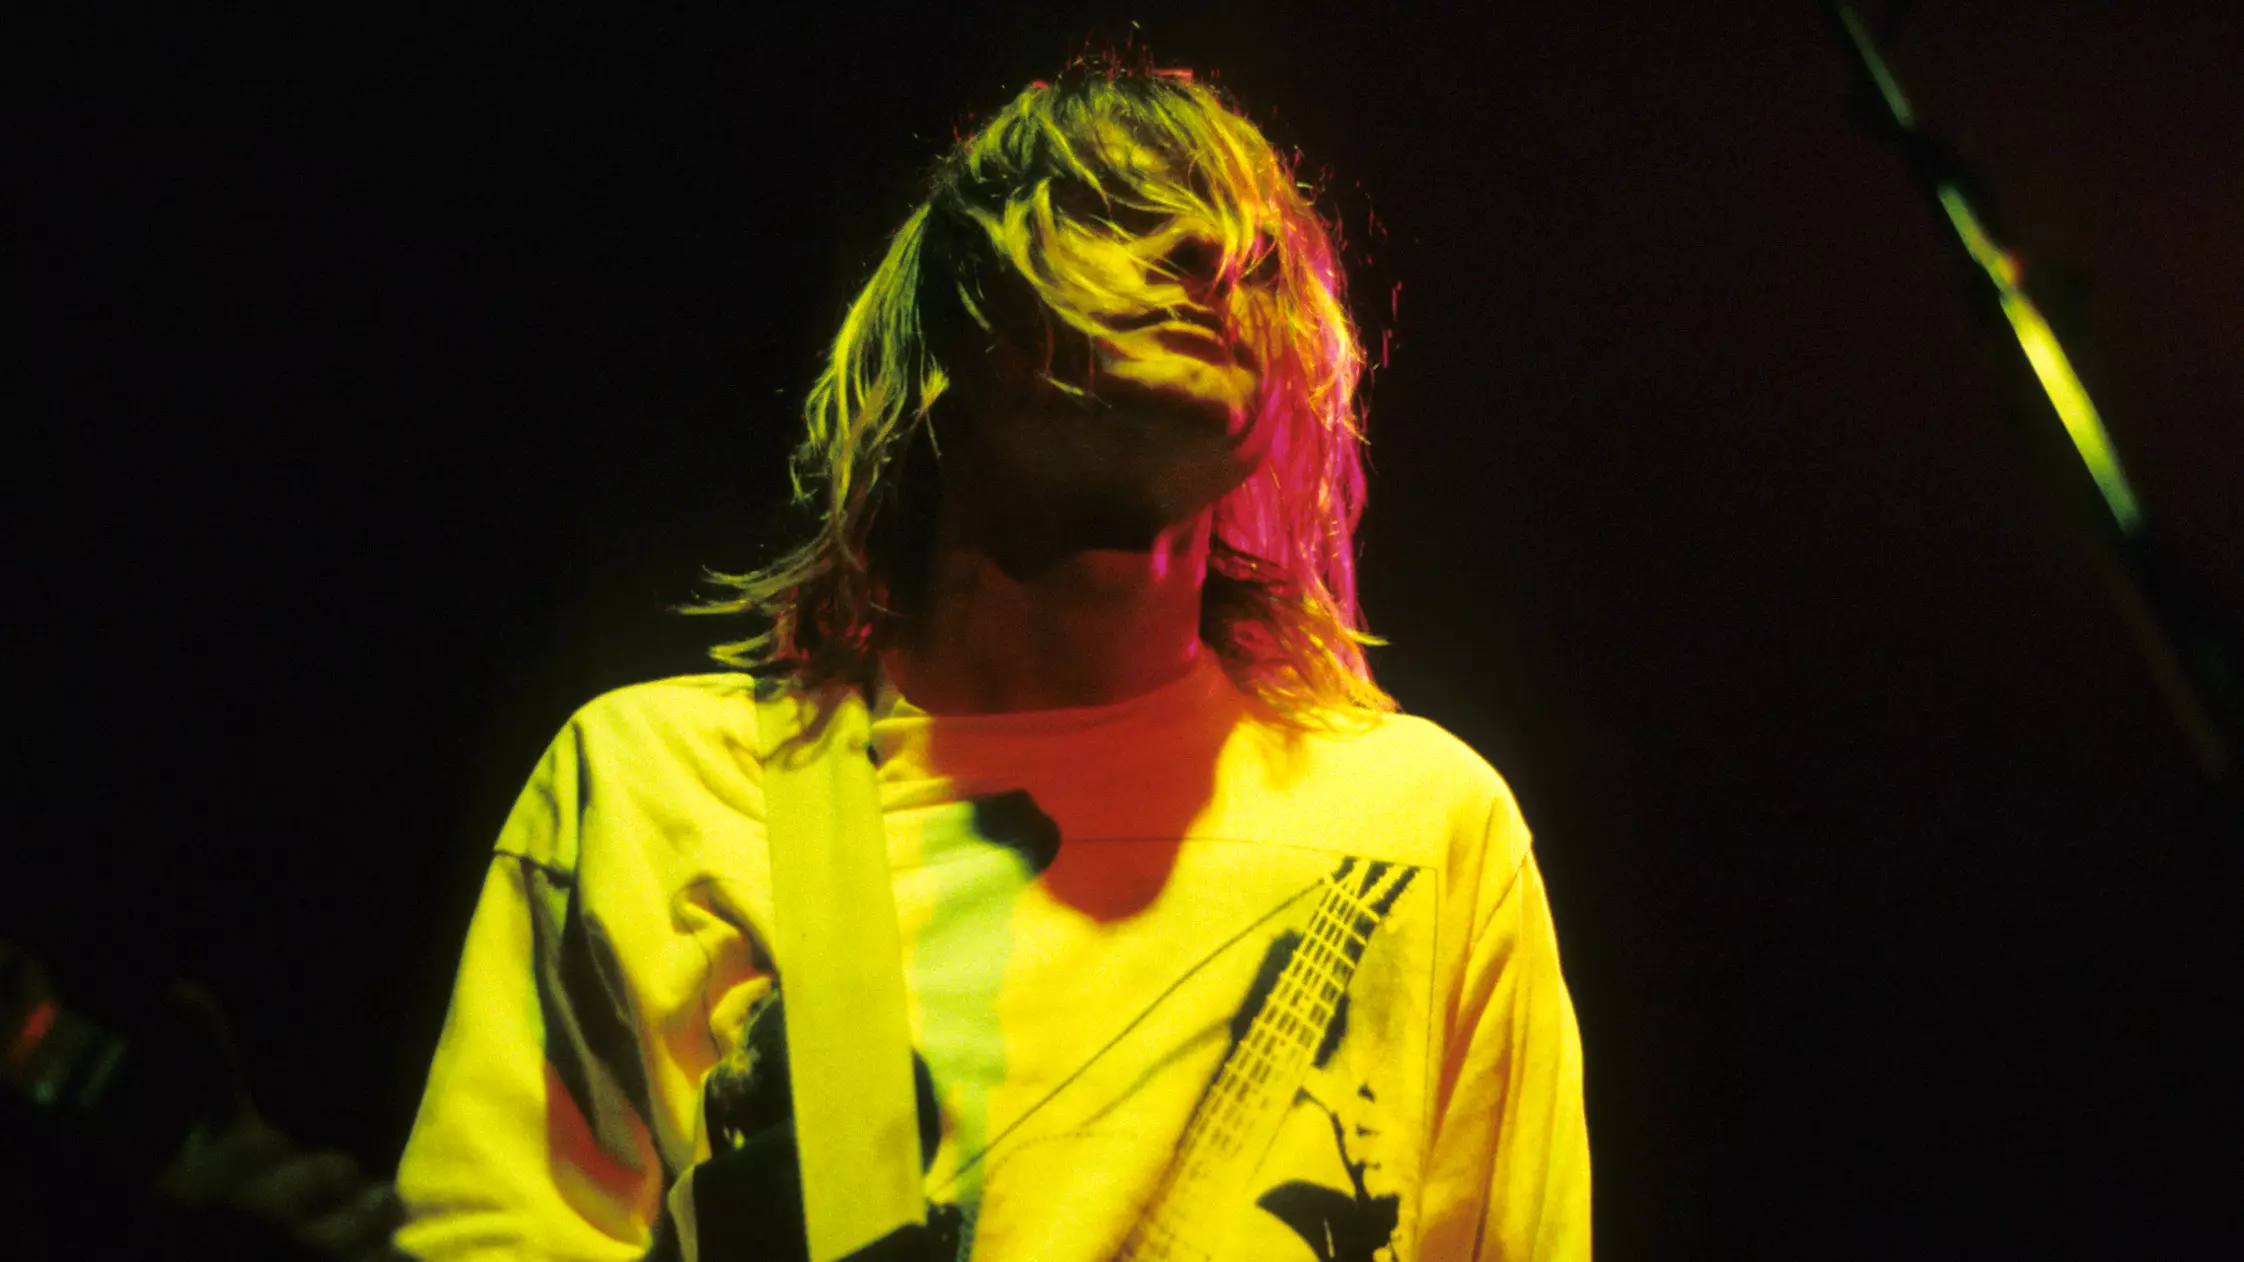 The Mysterious Death Of Kurt Cobain: One Of The Best Musicians Of All Time